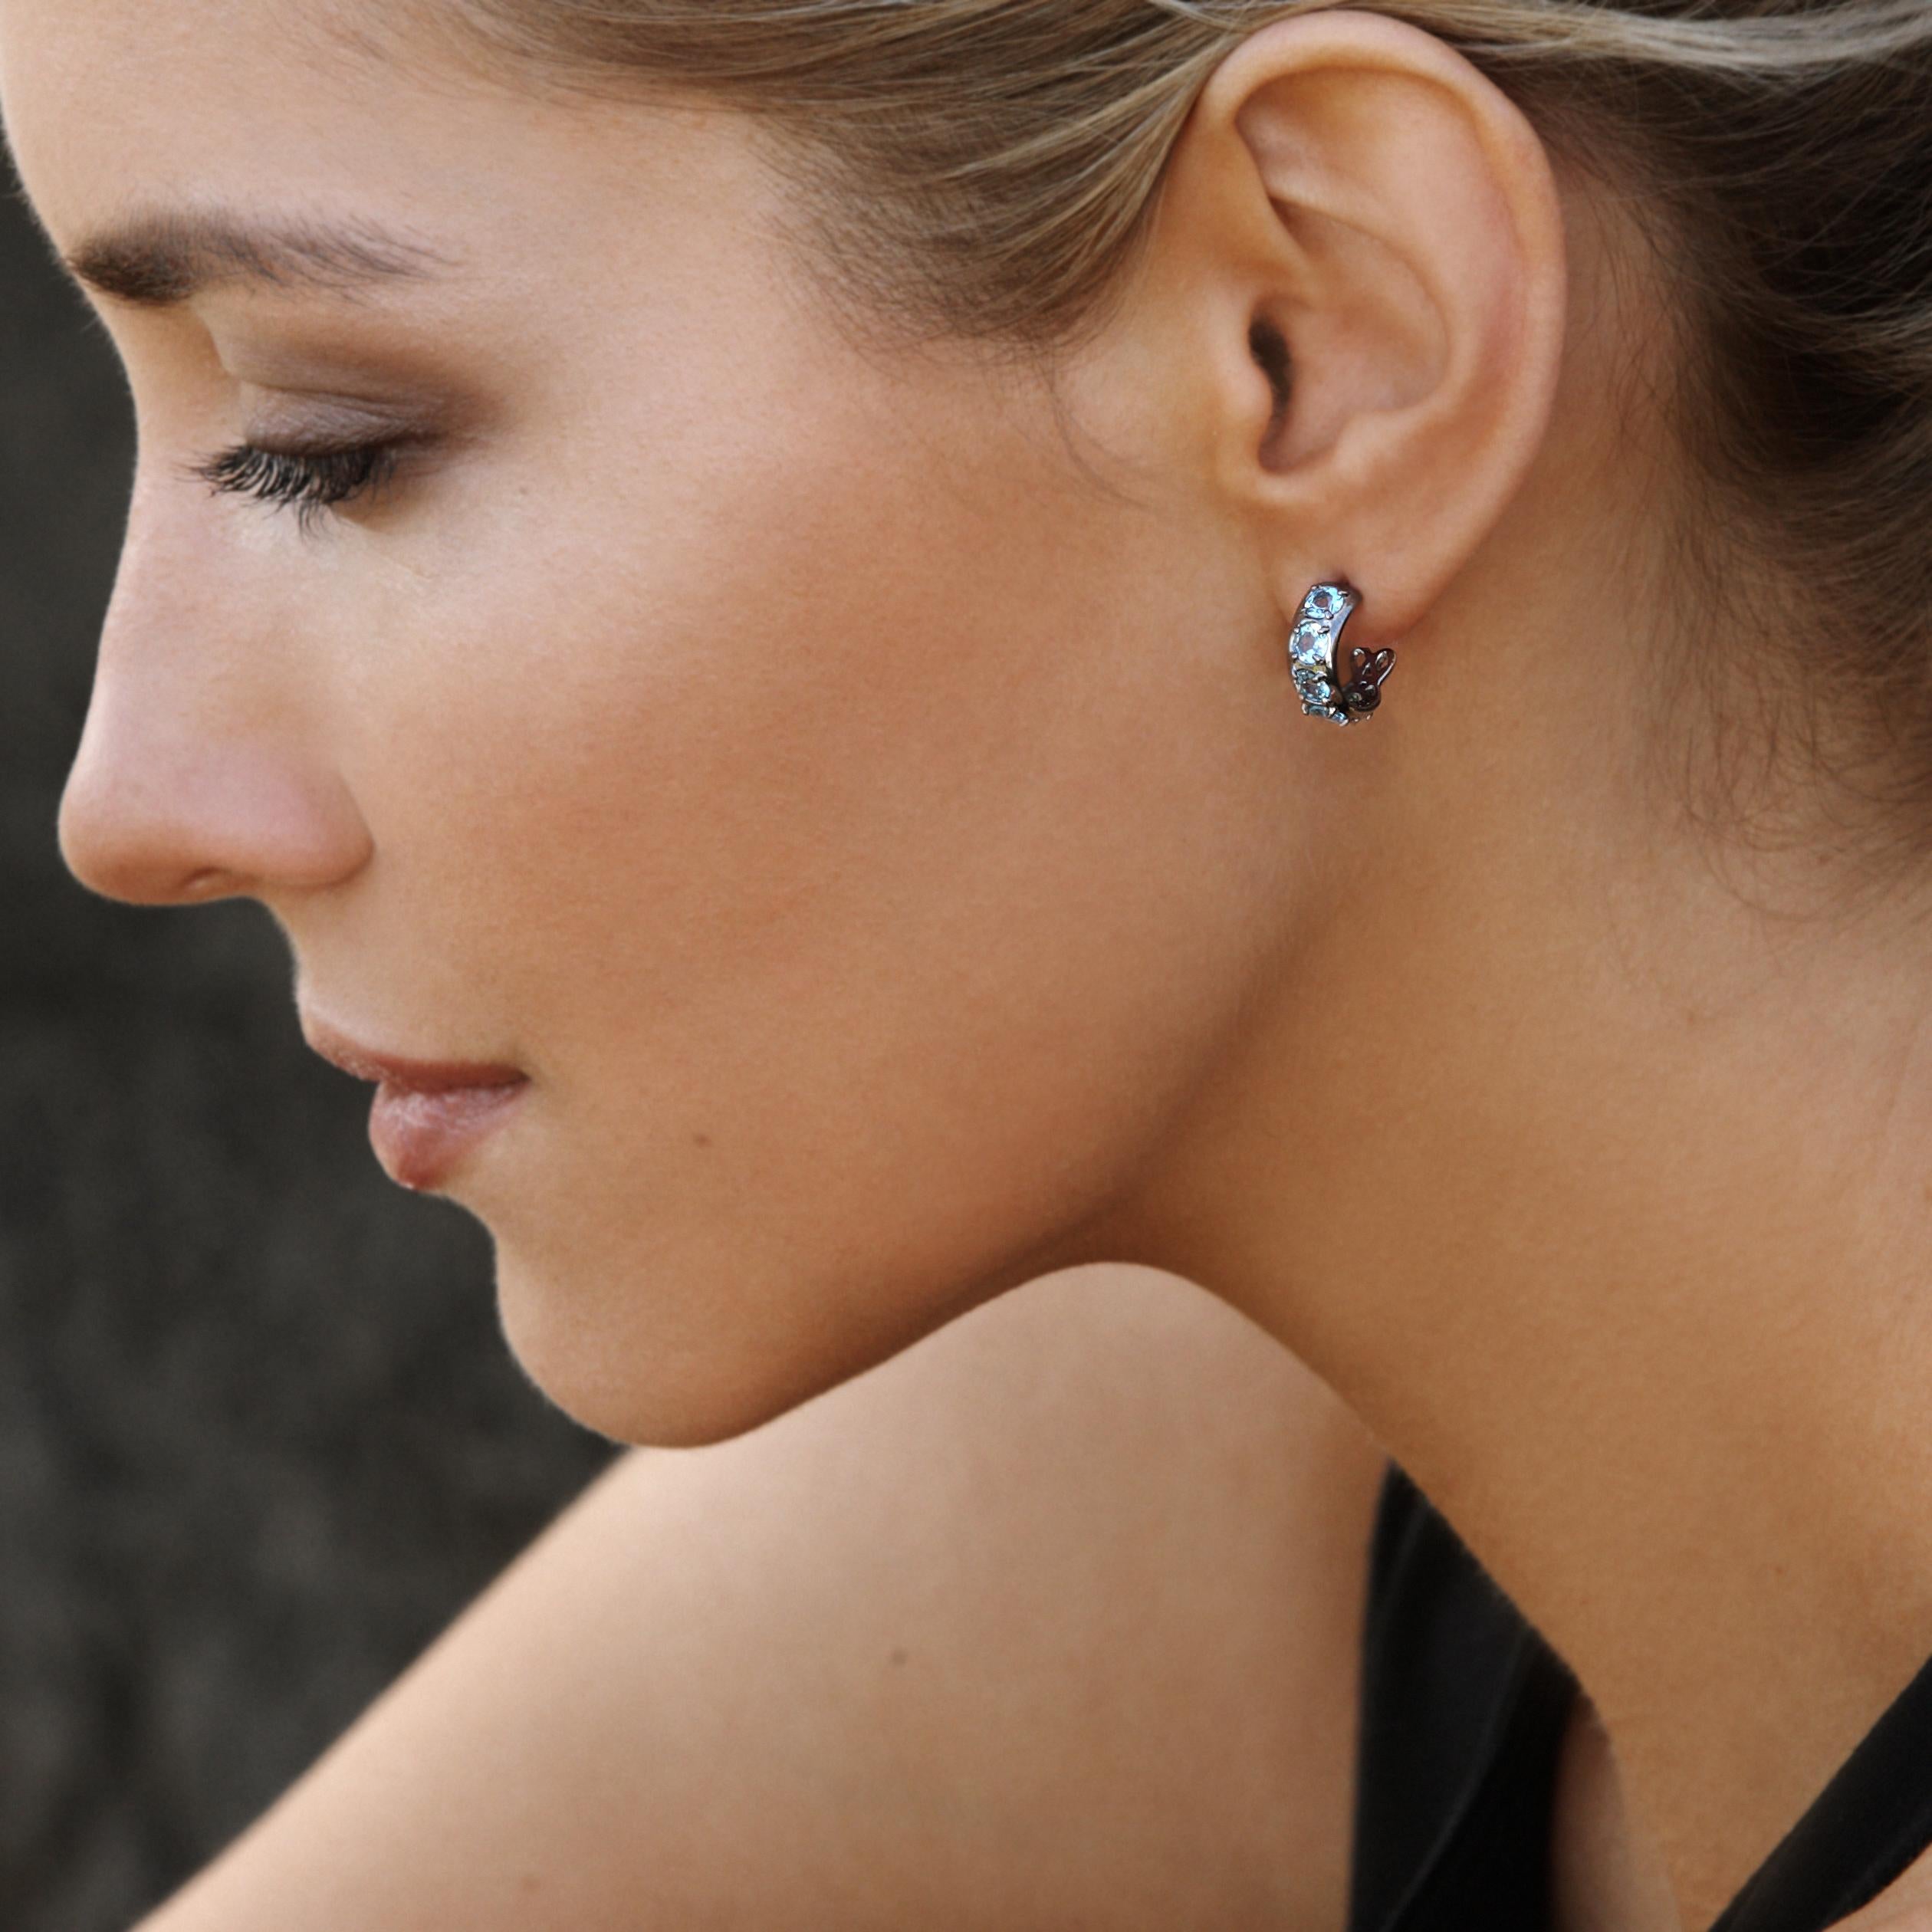 This pair of Candy Hoop earrings are so light and comfortable you won’t want to take them off. Snug to the ear, these little lovelies will provide some sparkle and color everywhere you go.

Sterling silver /14kt post
Blue topaz (full cut)
14kt posts